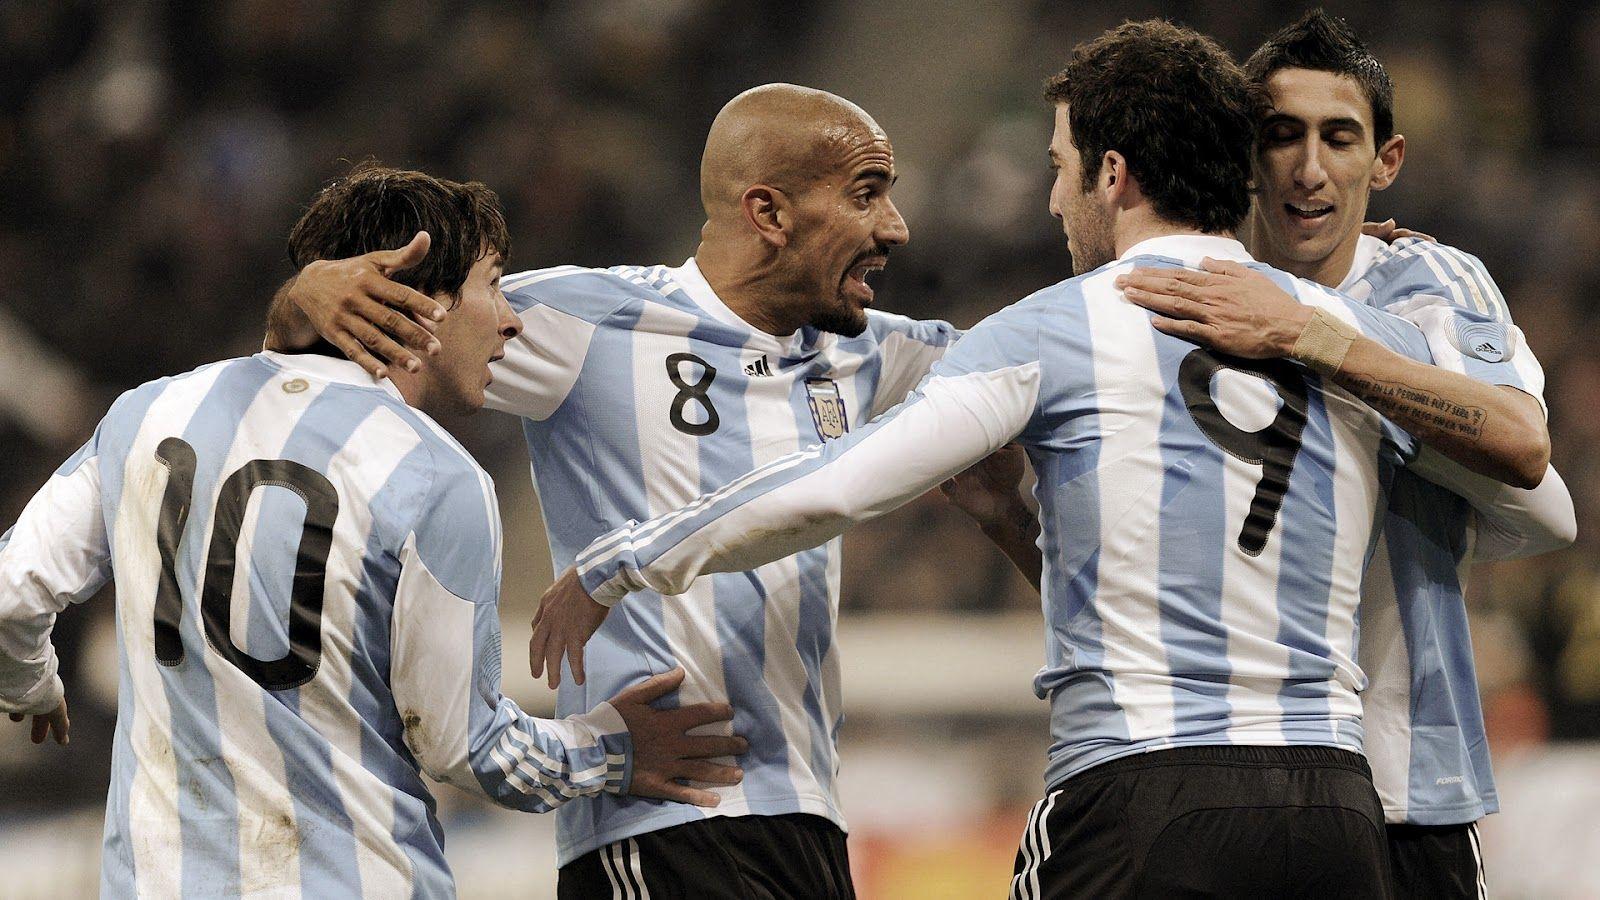 Messi and Higuain in Argentina Football Team. Football Wallpaper HD